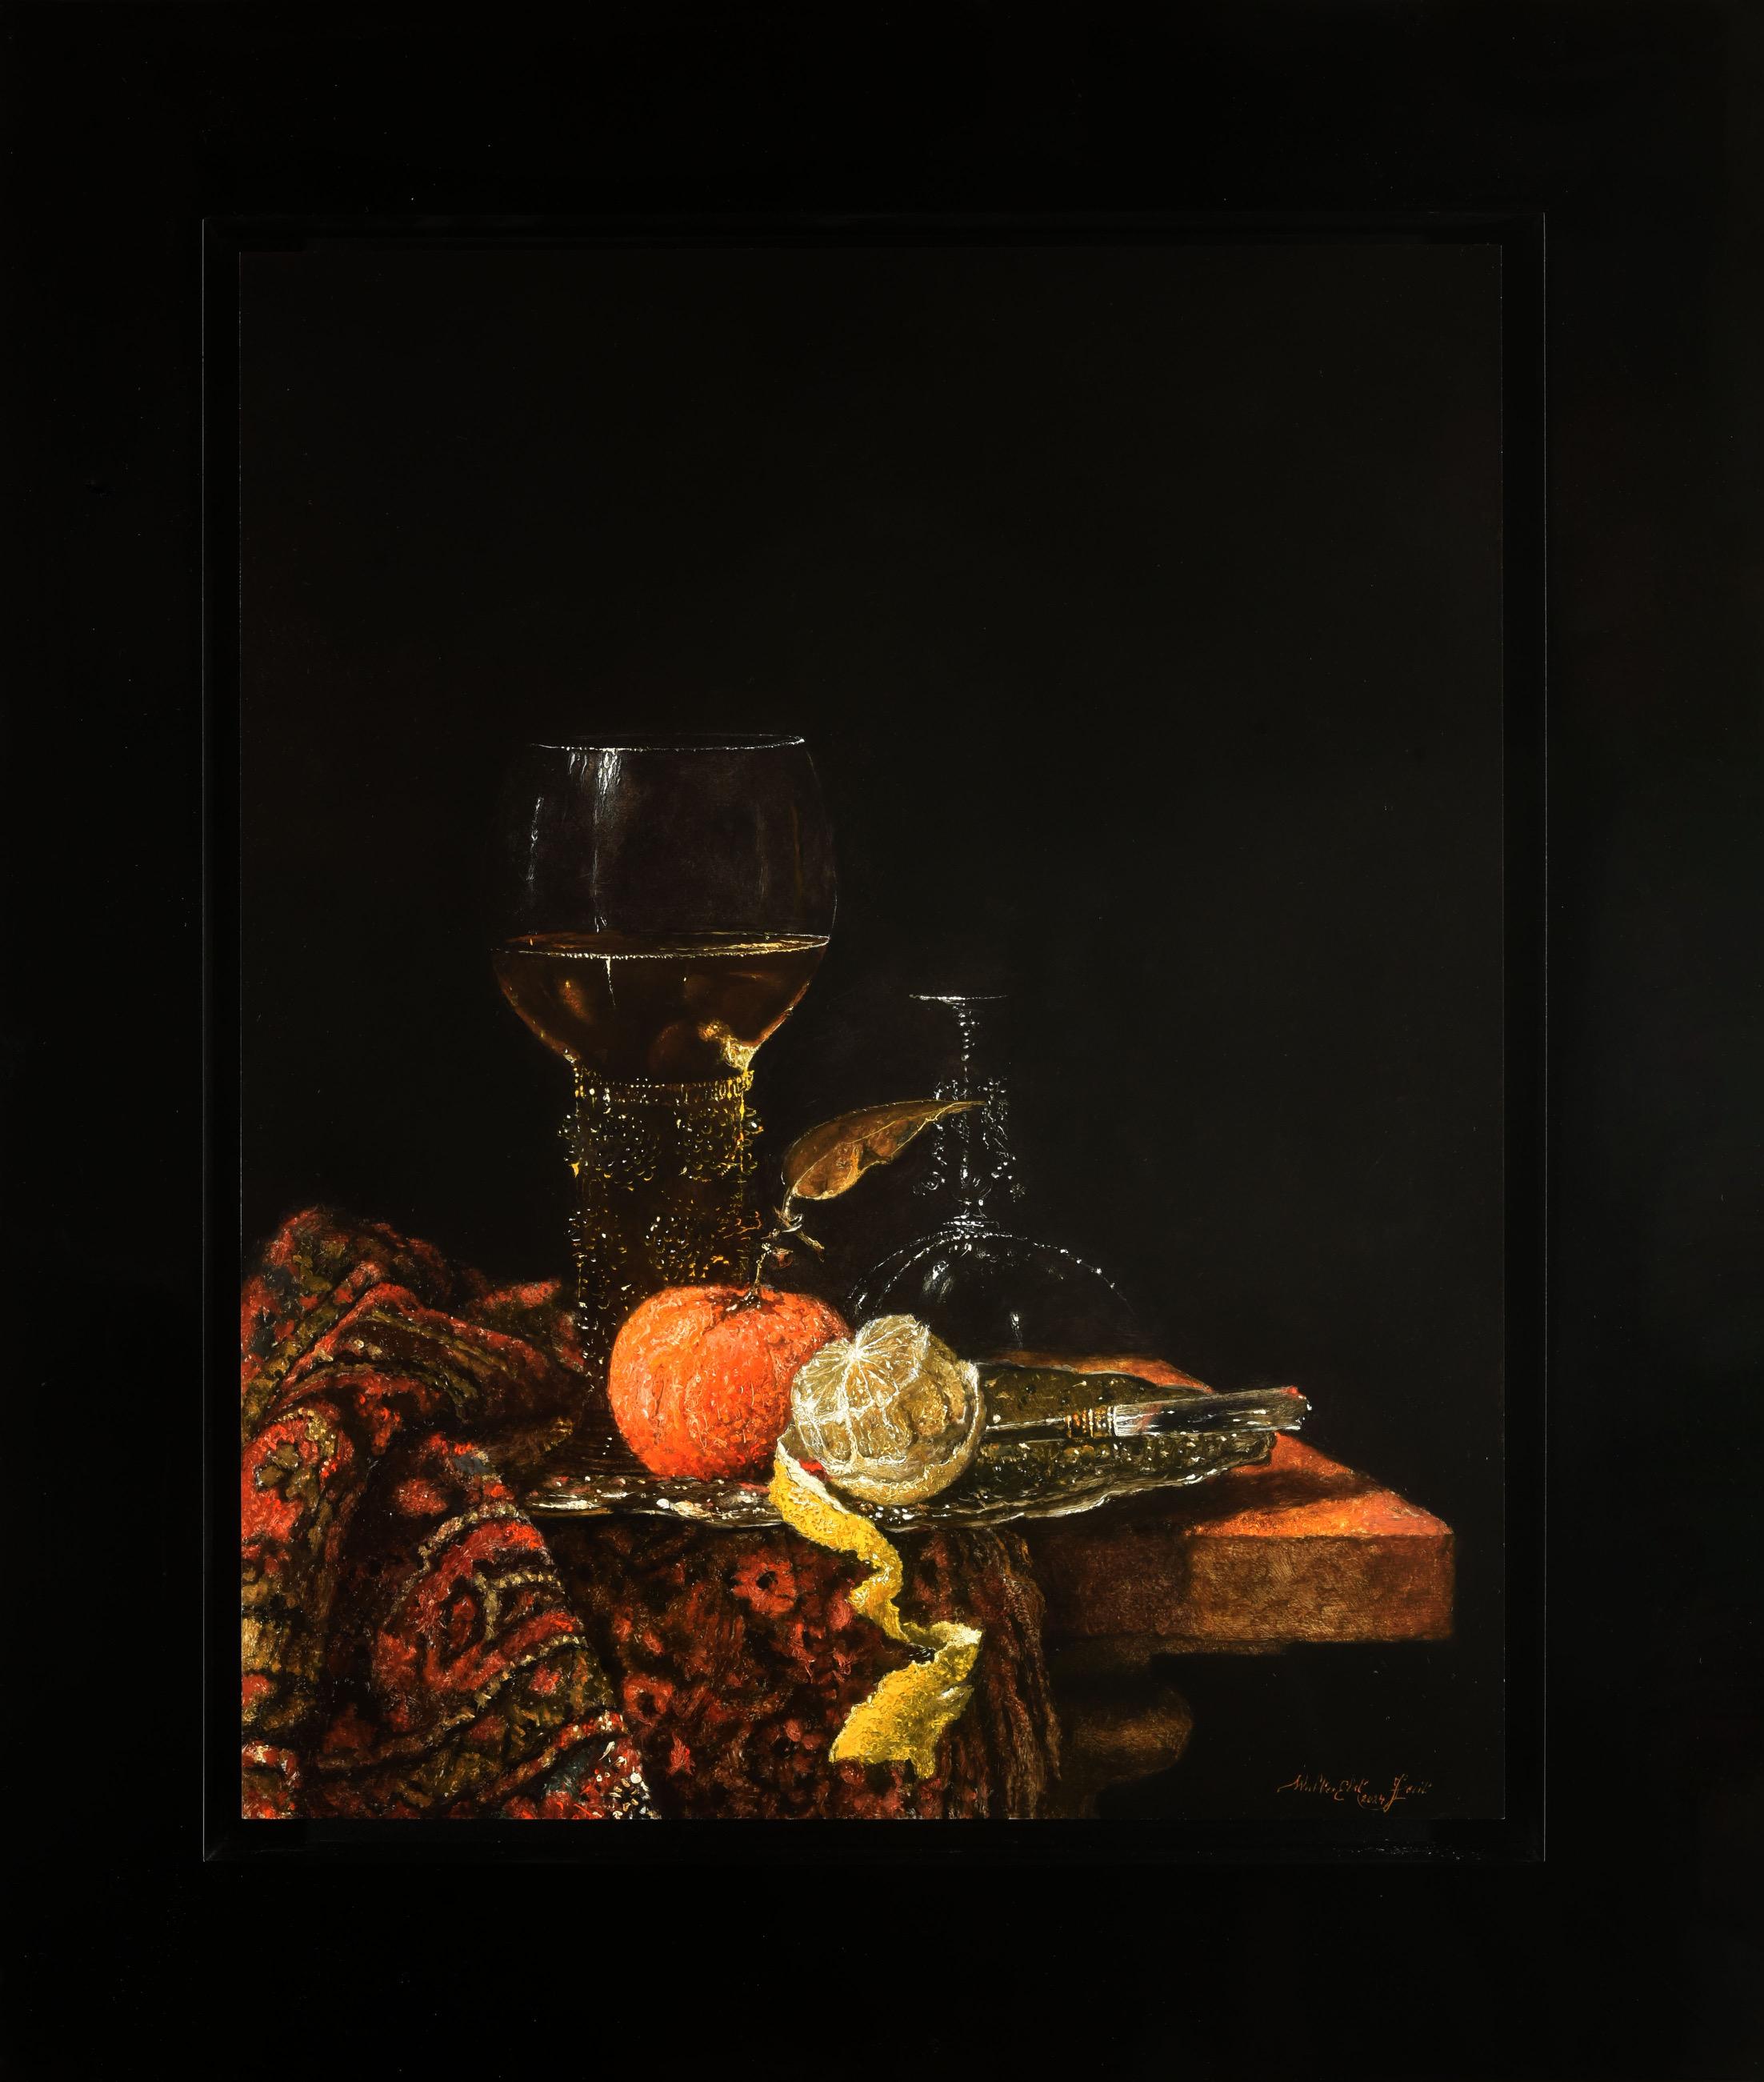 Walter Elst Figurative Painting - Hommage aan Willem Kalf Still Life Oil Painting on Panel In Stock 